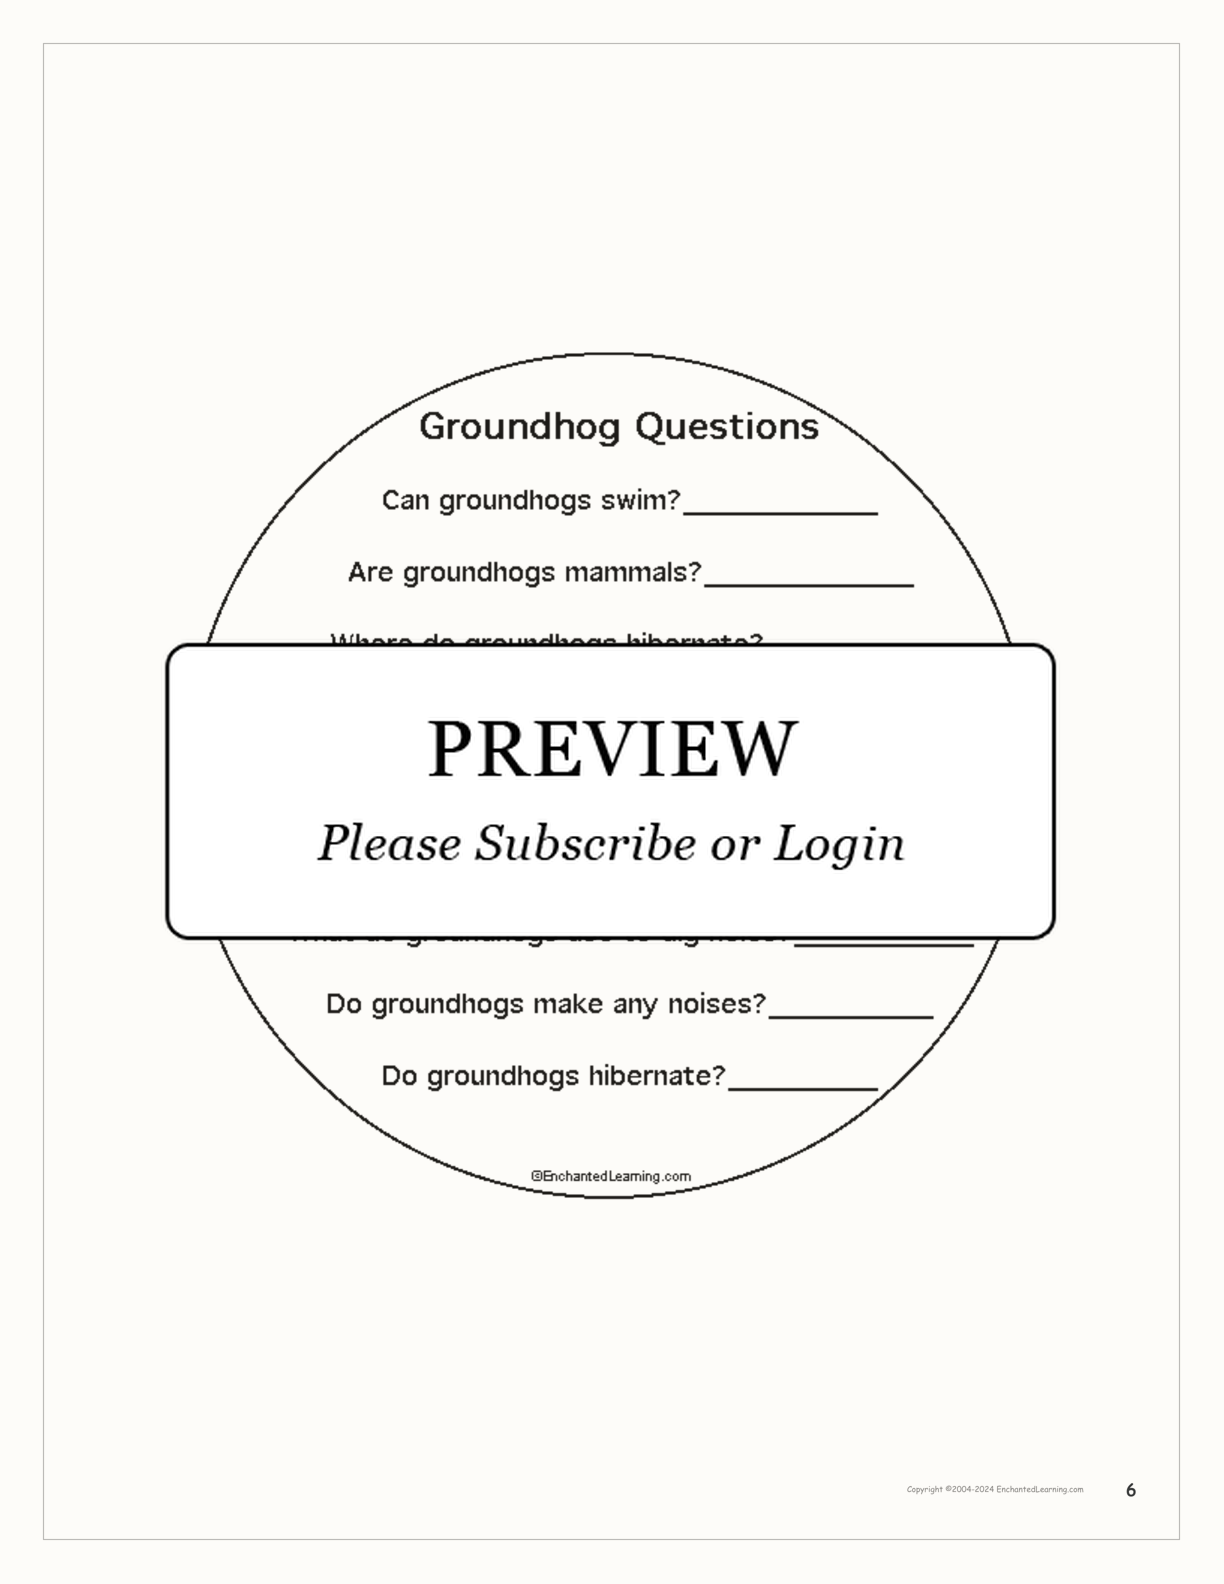 Groundhog Day Activity Book interactive printout page 6